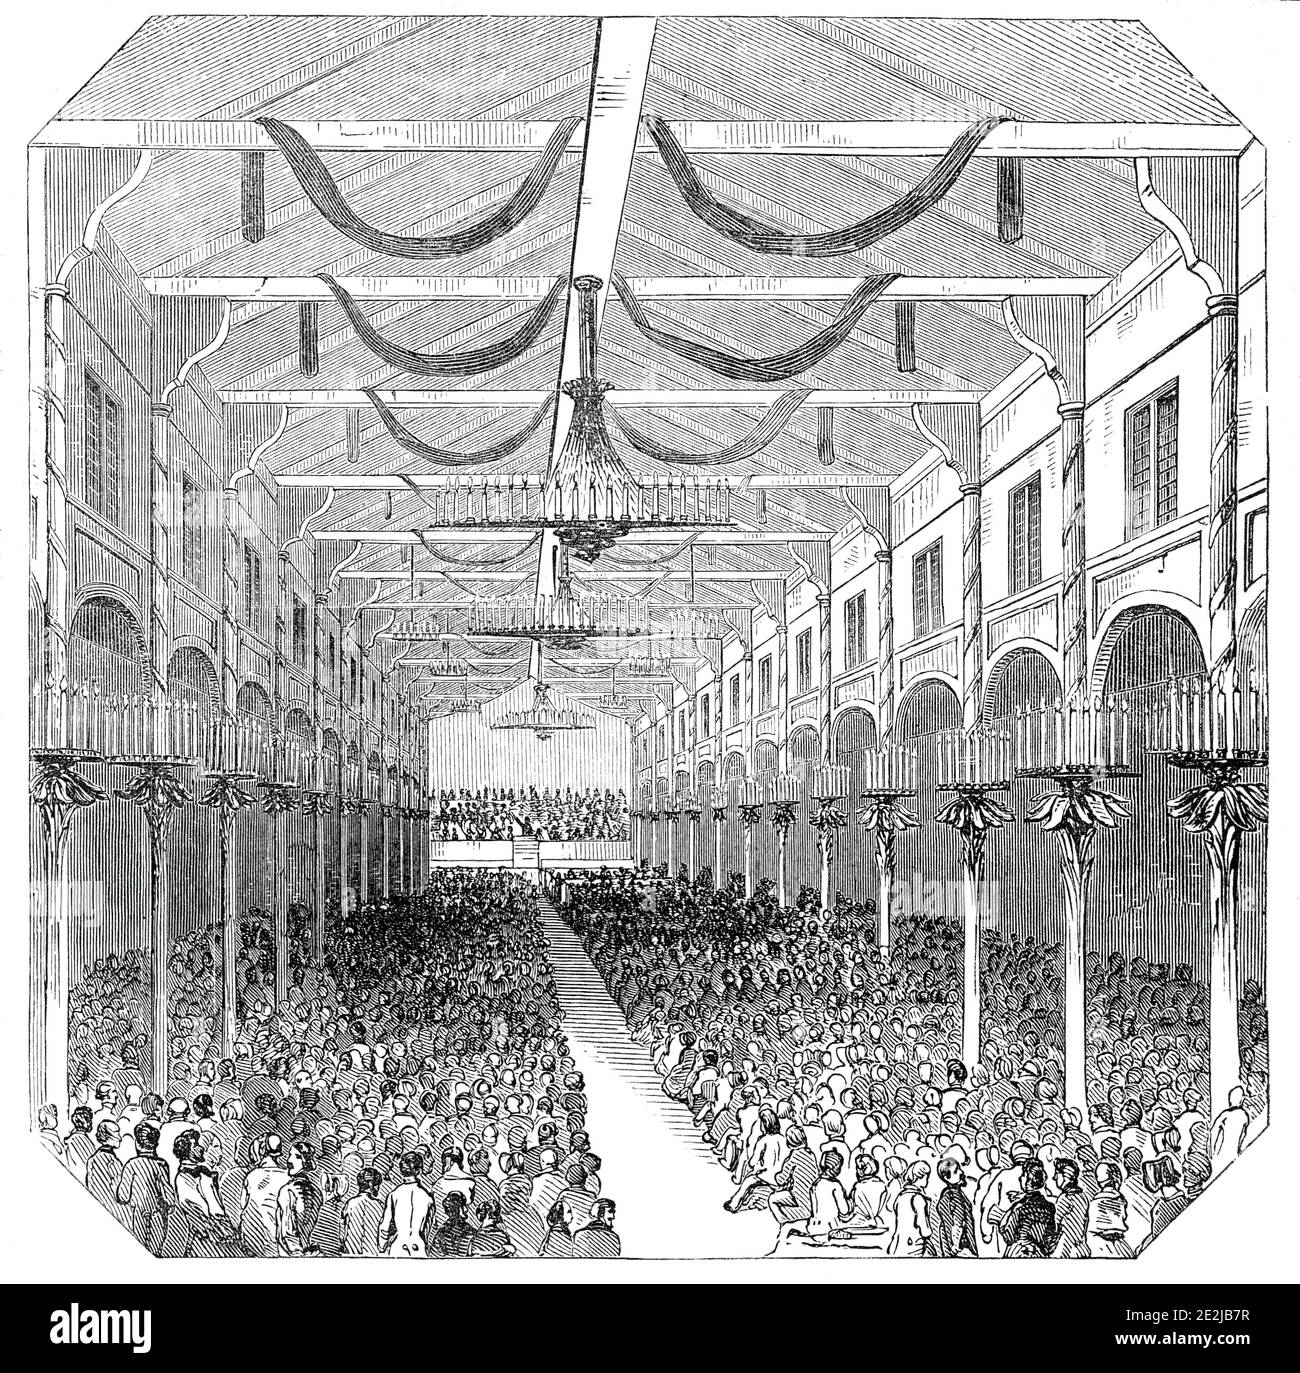 Concert at the Beethoven Hall, 1845. Queen Victoria attends a concert in Bonn during a royal visit to Germany. 'The Kunstler Concert, or artists' concert, the last of the musical performances, was announced for nine o'clock yesterday morning. On entering the Beethoven Hall I found it crowded to excess. To the left of the orchestra a stage had, been erected, elegantly fitted up with glasses, carpets, state chairs, &amp;c., for the expected visit of Royalty. Ten o'clock, however, having arrived, and the audience becoming impatient, [Franz] Liszt began his &quot;Festkantate,&quot; composed in hon Stock Photo